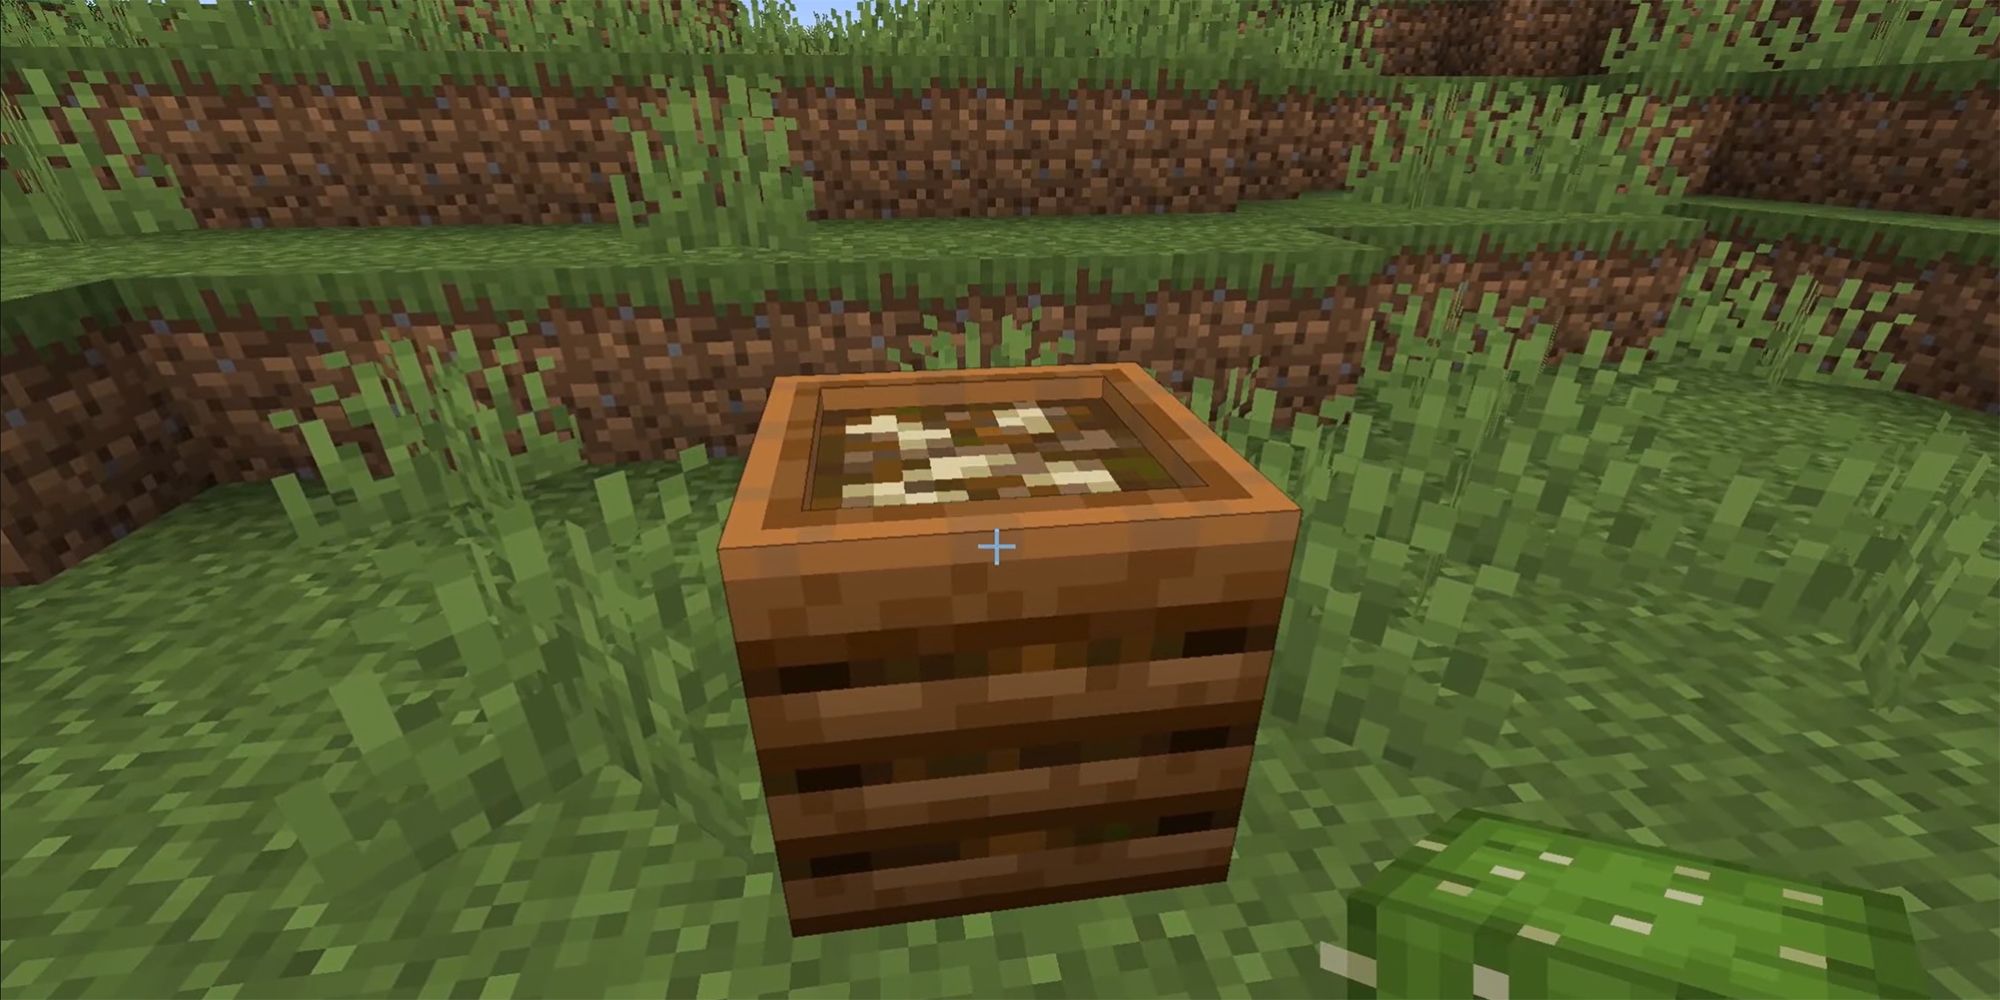 Uses of kelp in Minecraft - Composter